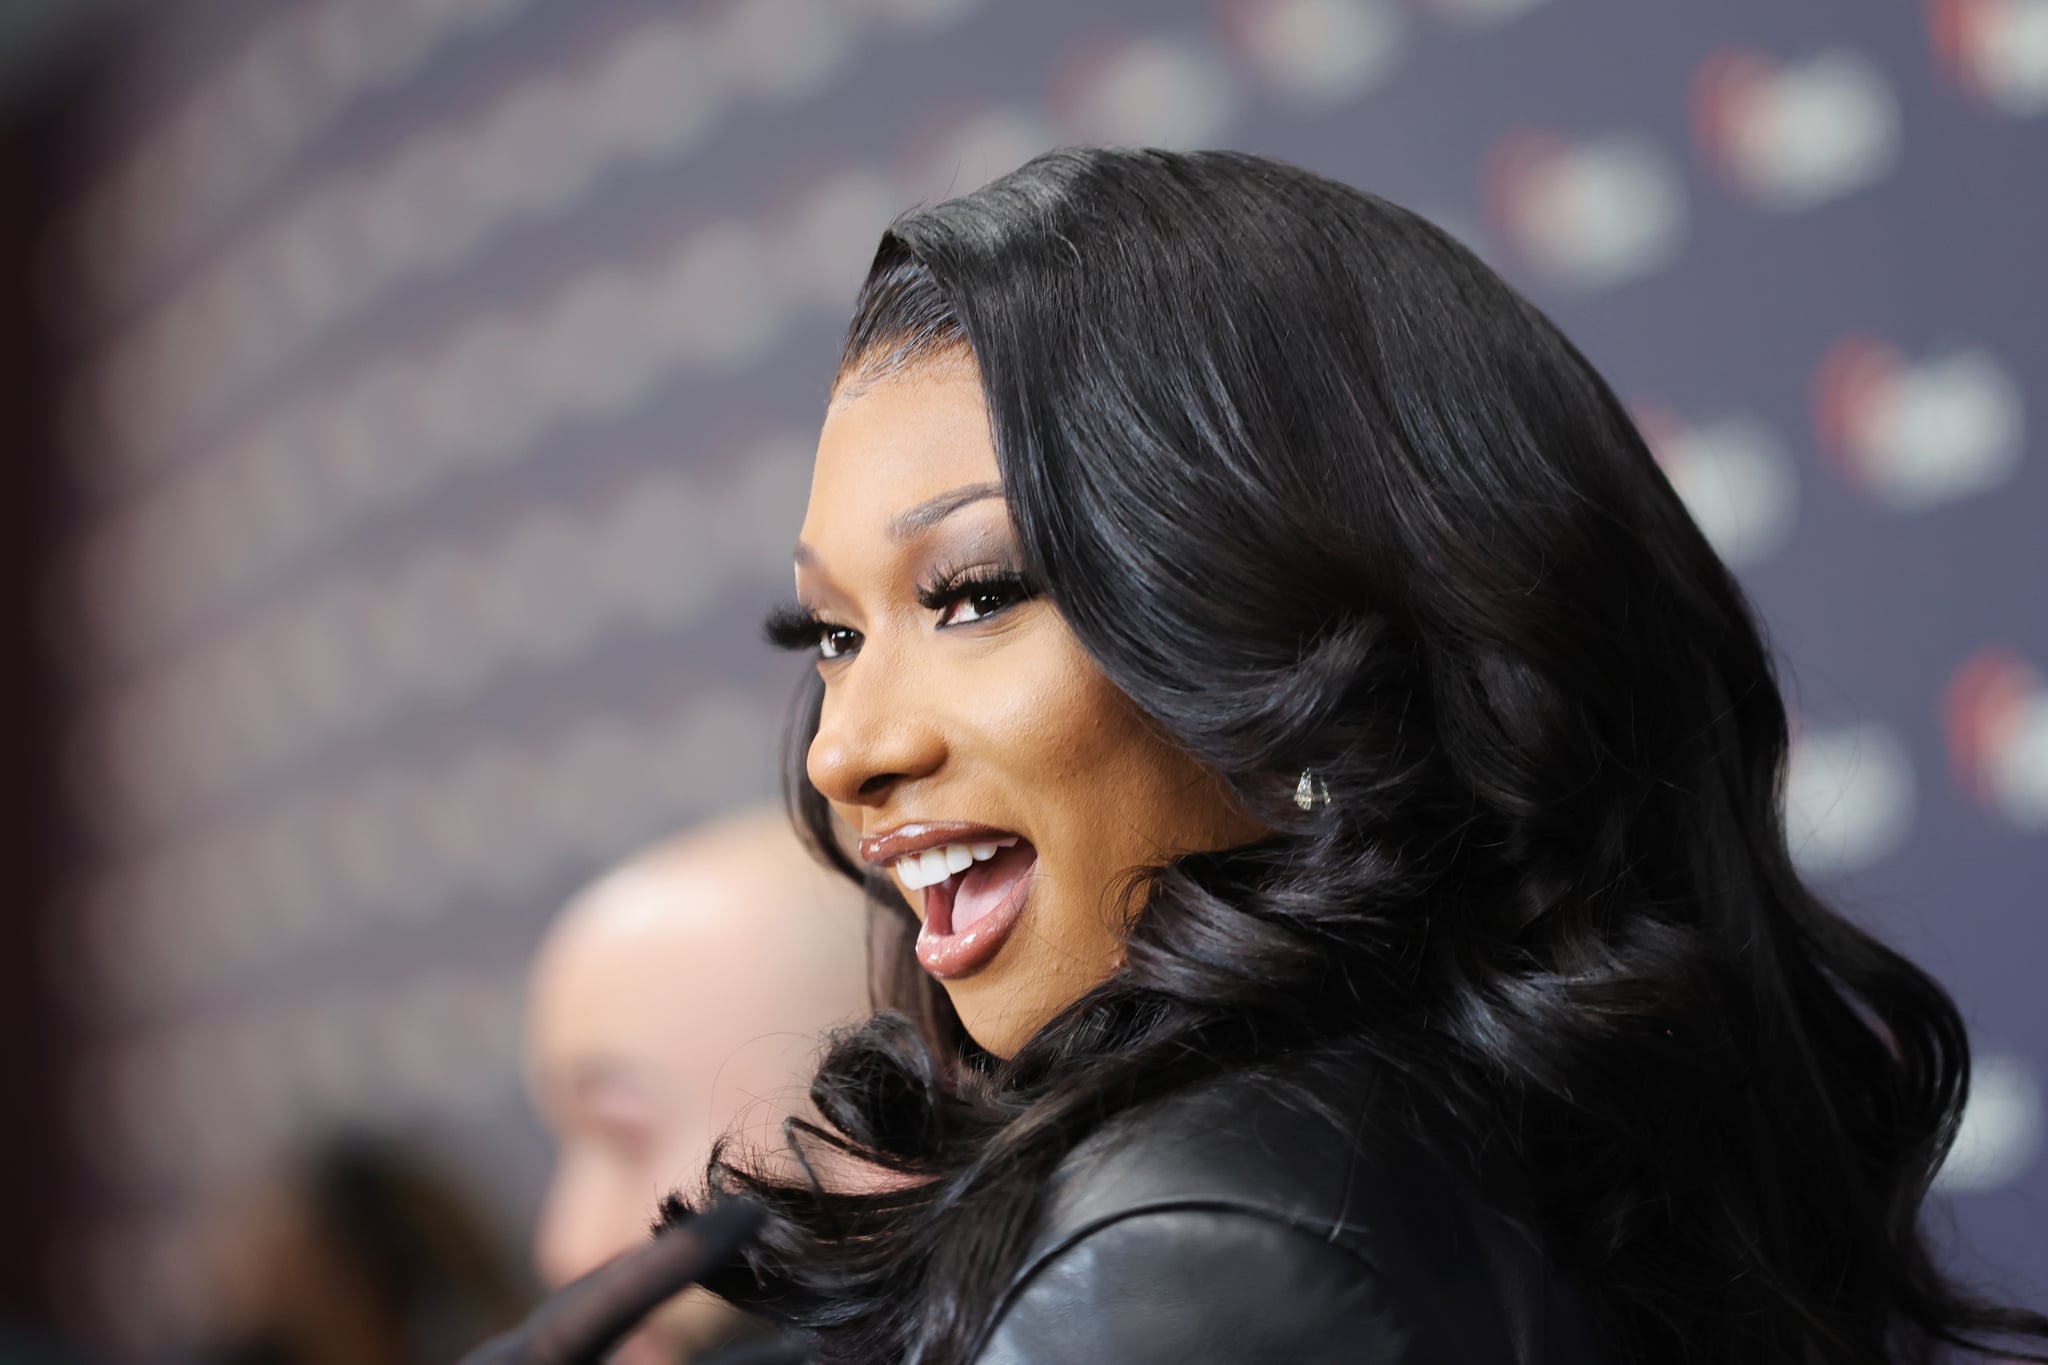 CULVER CITY, CALIFORNIA - FEBRUARY 12: Megan Thee Stallion attends the Fanatics Super Bowl Party at 3Labs on February 12, 2022 in Culver City, California. (Photo by Amy Sussman/Getty Images)